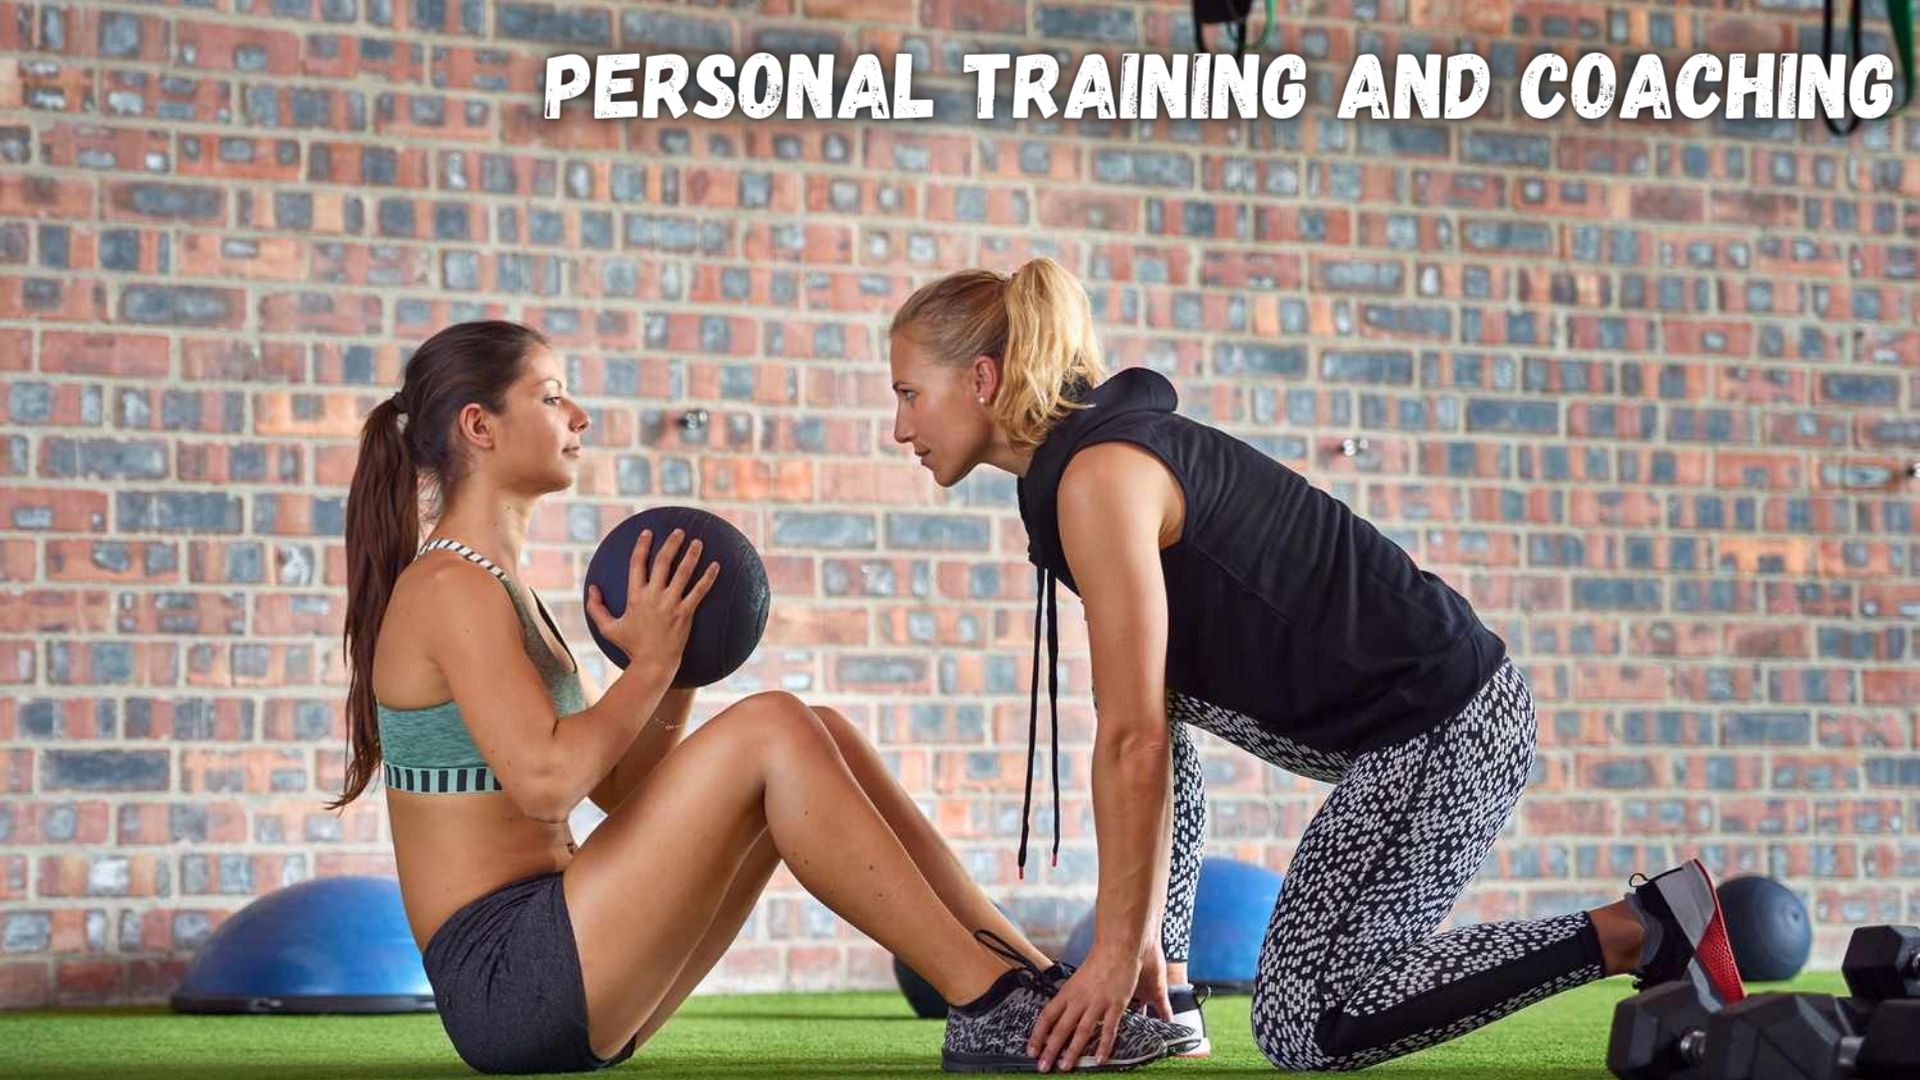 Personal Training and Coaching.